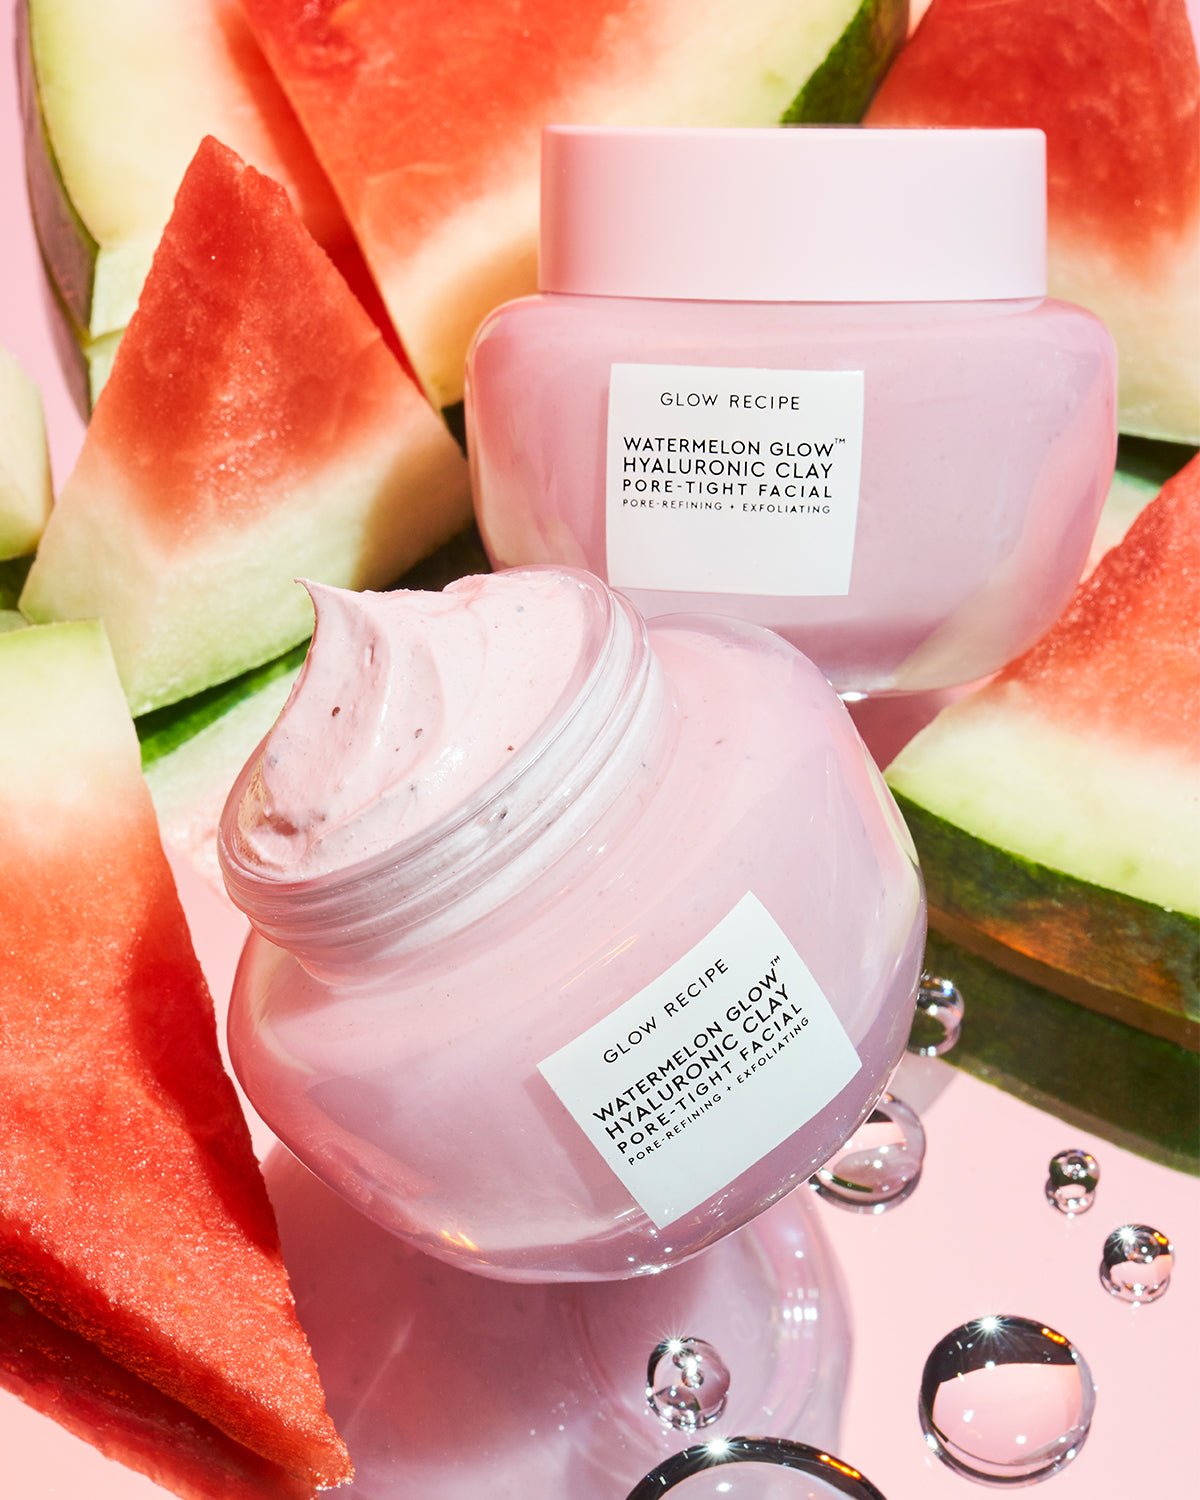 Watermelon Glow Hyaluronic Clay Pore-Tight Facial - 60 ml